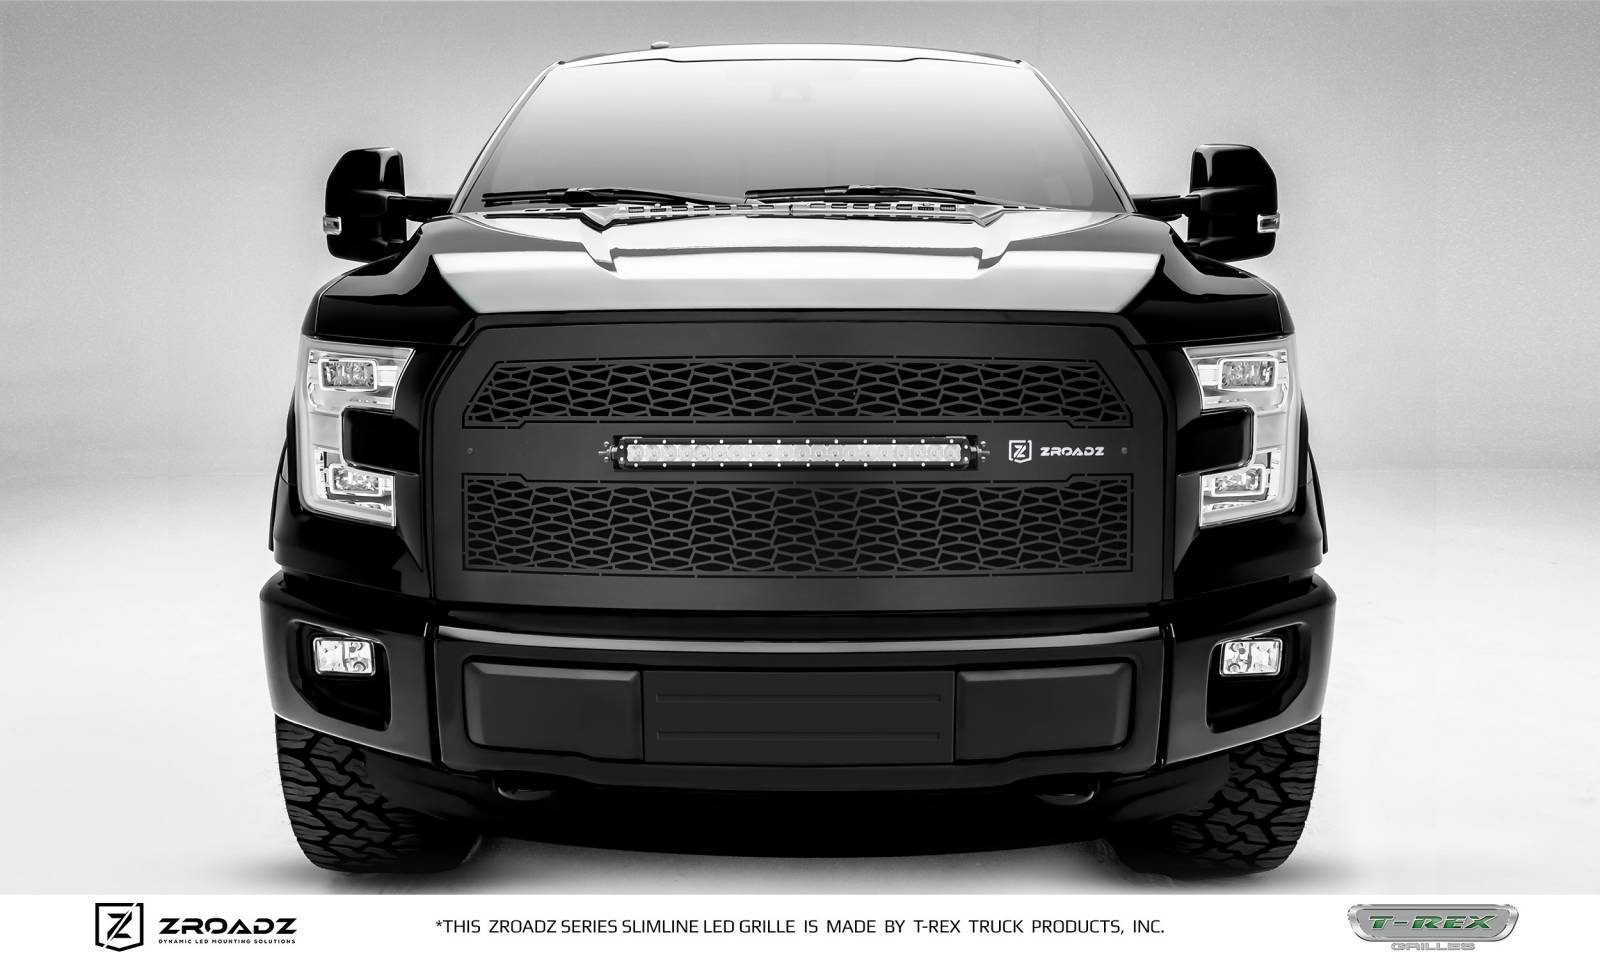 T-REX Grilles - 2015-2017 Ford F-150 ZROADZ LED Grille, Black, 1 Pc, Replacement with (1) 20 LED, Does Not Fit Vehicles with Camera - Part # Z315731